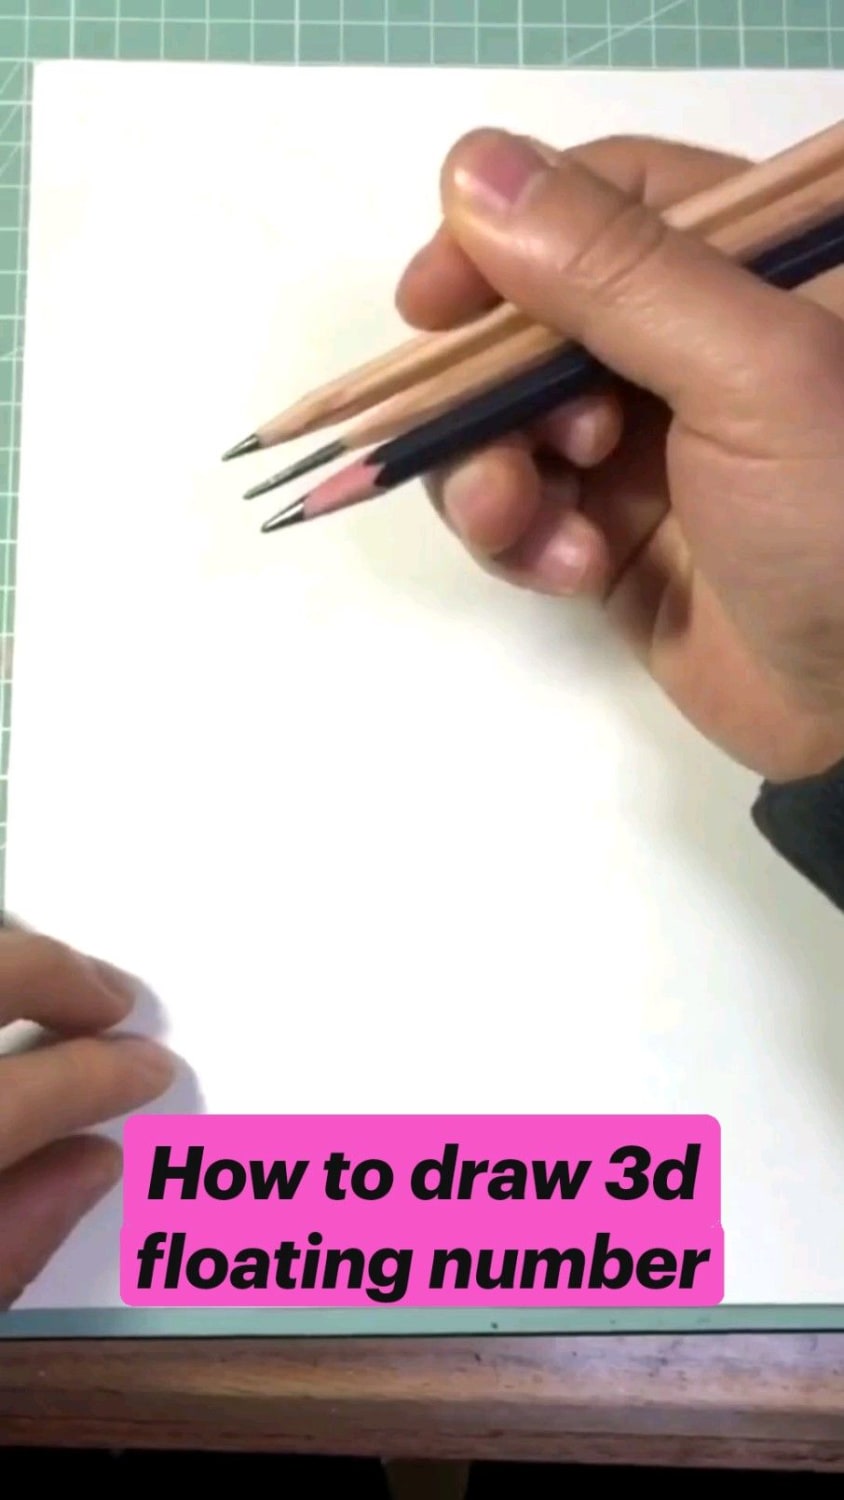 How to draw 3d floating number